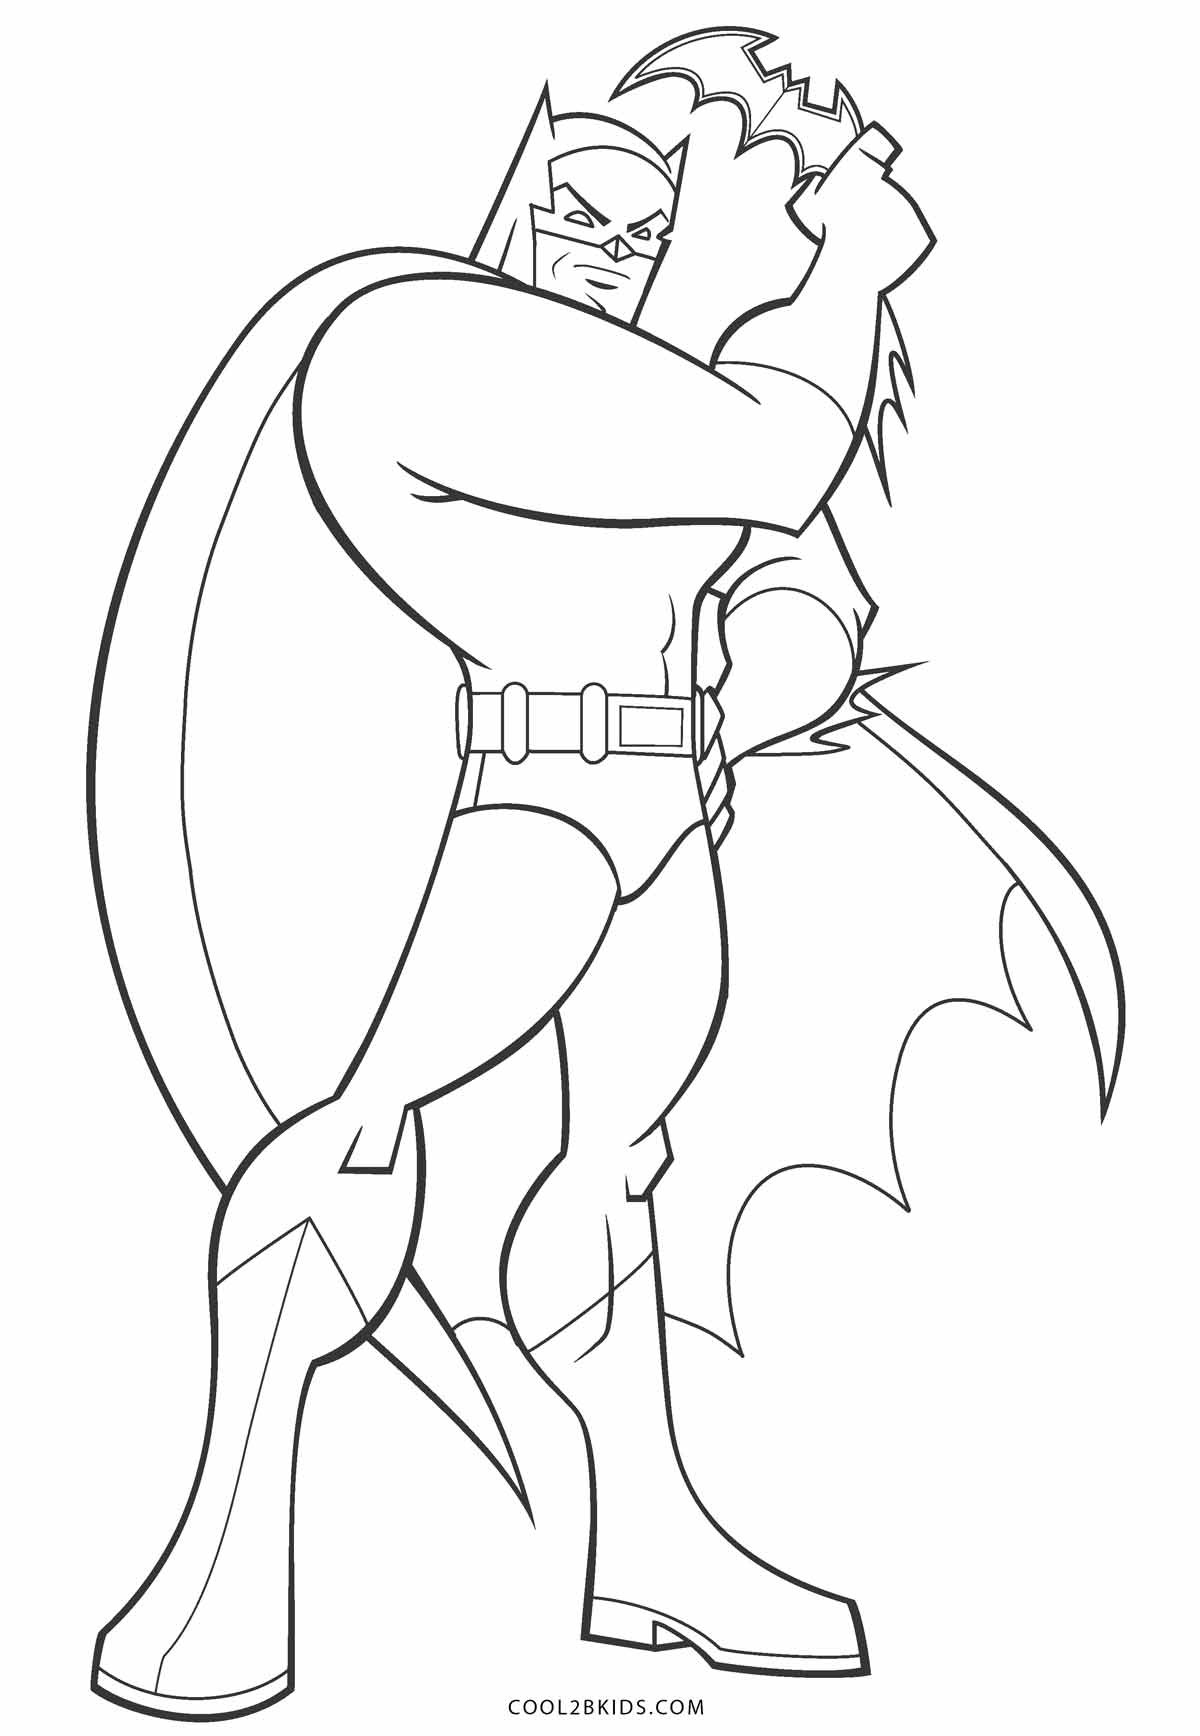 Batman Coloring Pages For Kids
 Free Printable Batman Coloring Pages For Kids